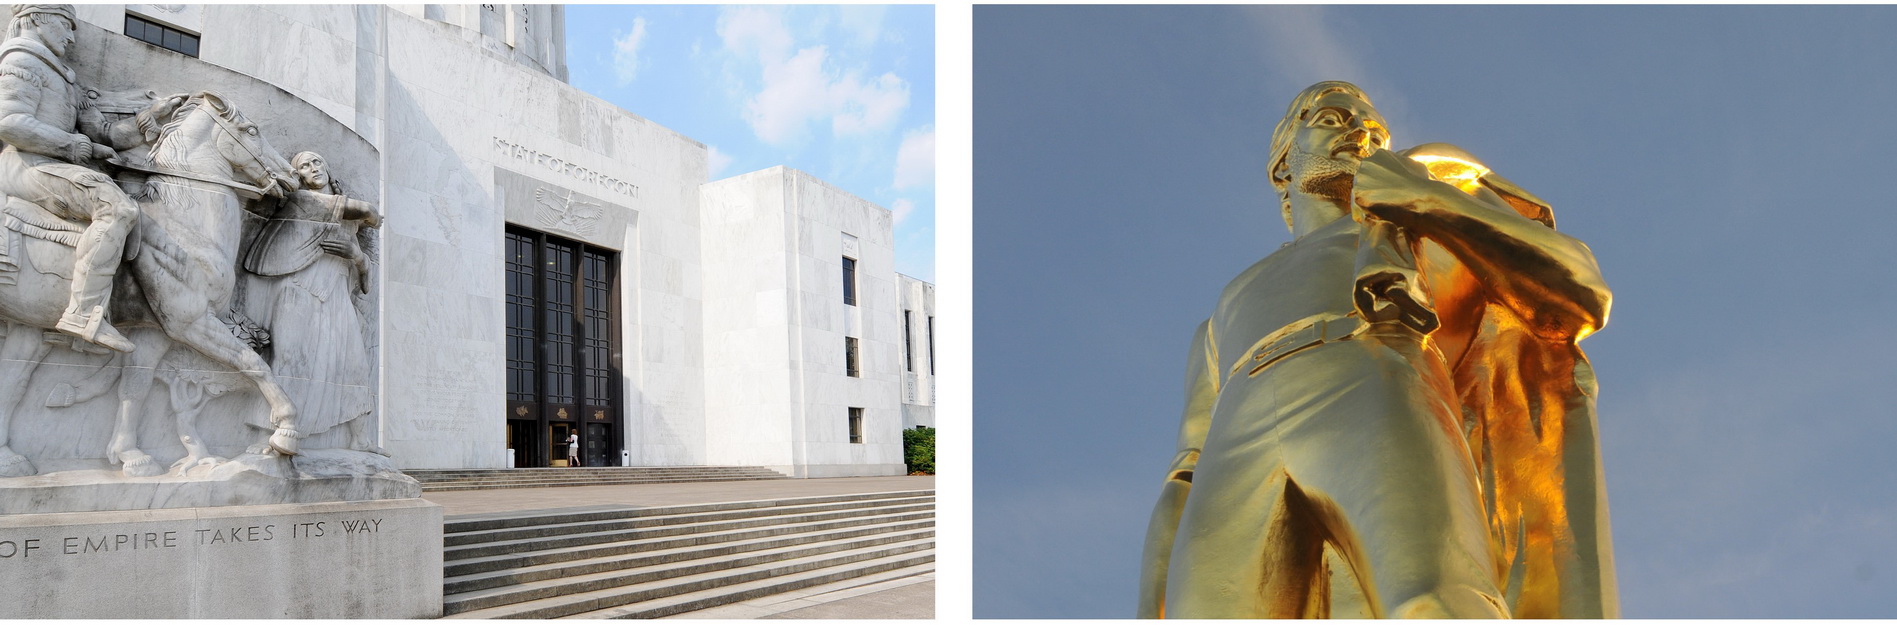 collage of OR capitol, on the left a side view of steps and monument and on the right a large gold man statue